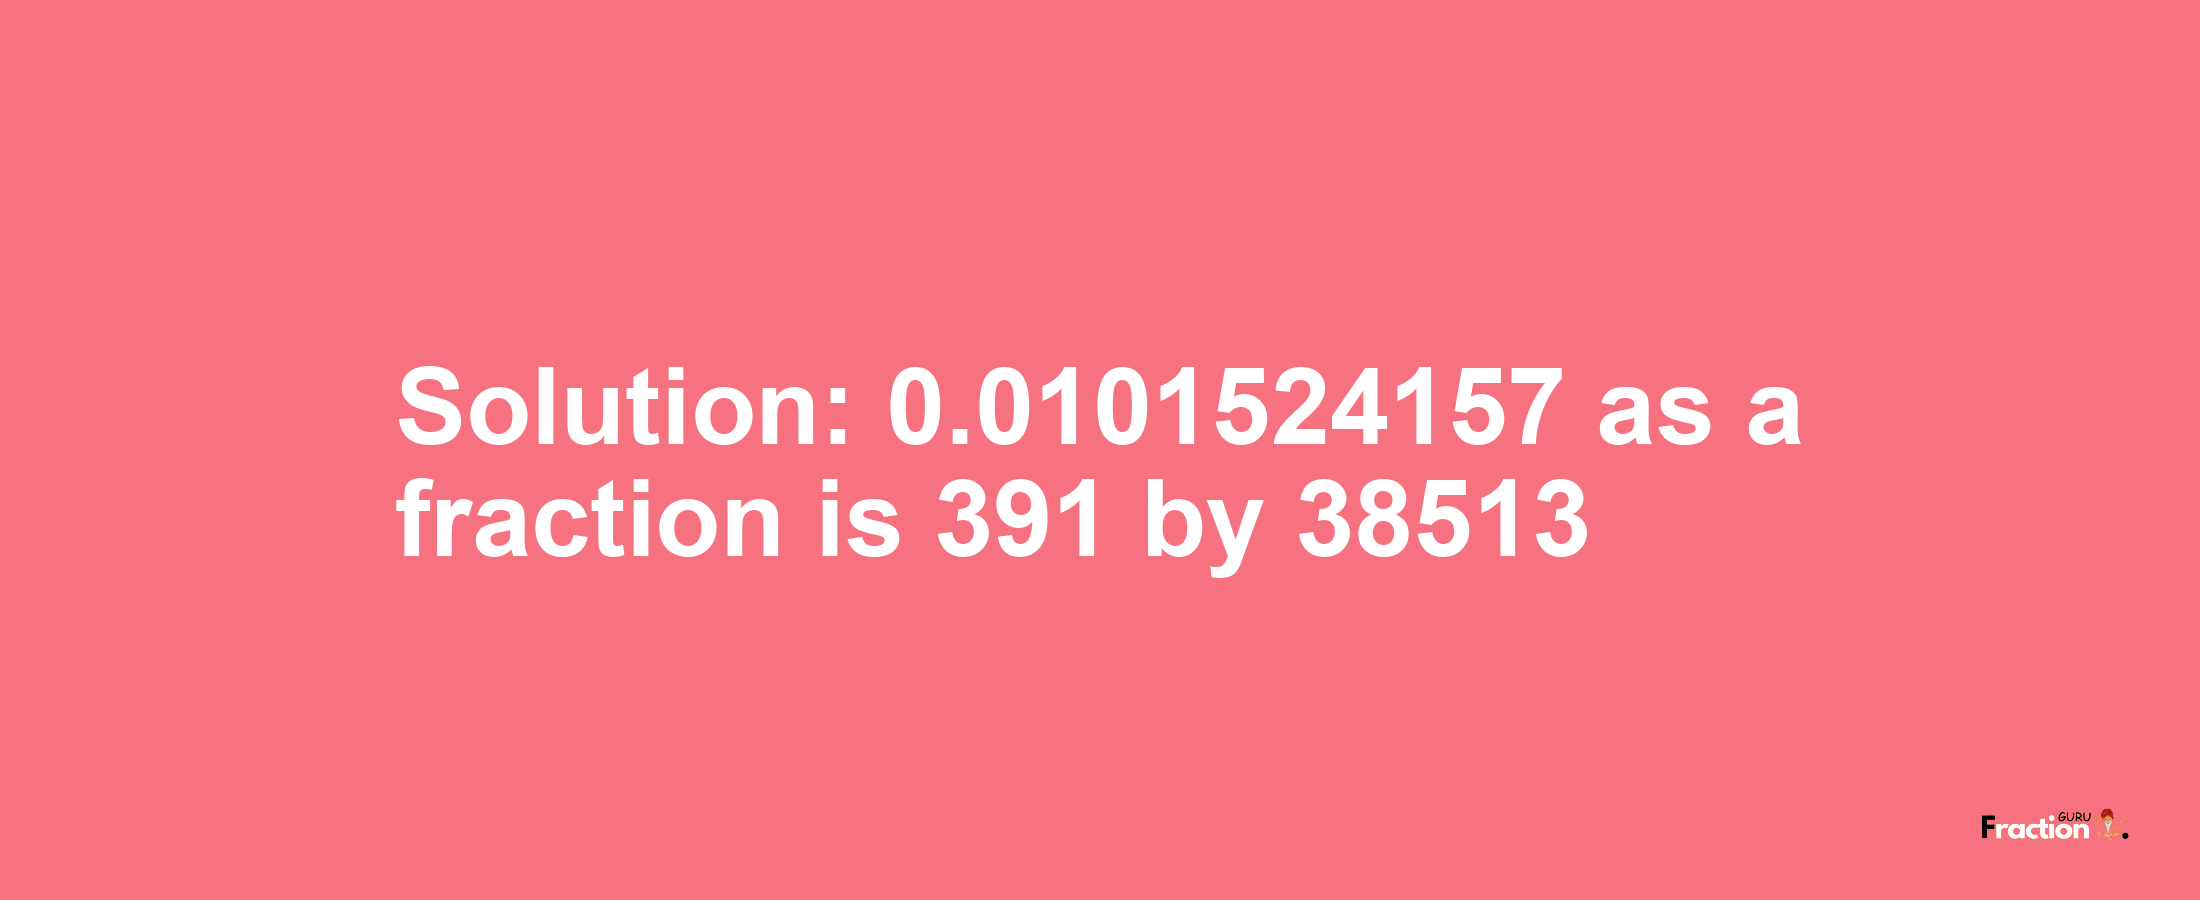 Solution:0.0101524157 as a fraction is 391/38513